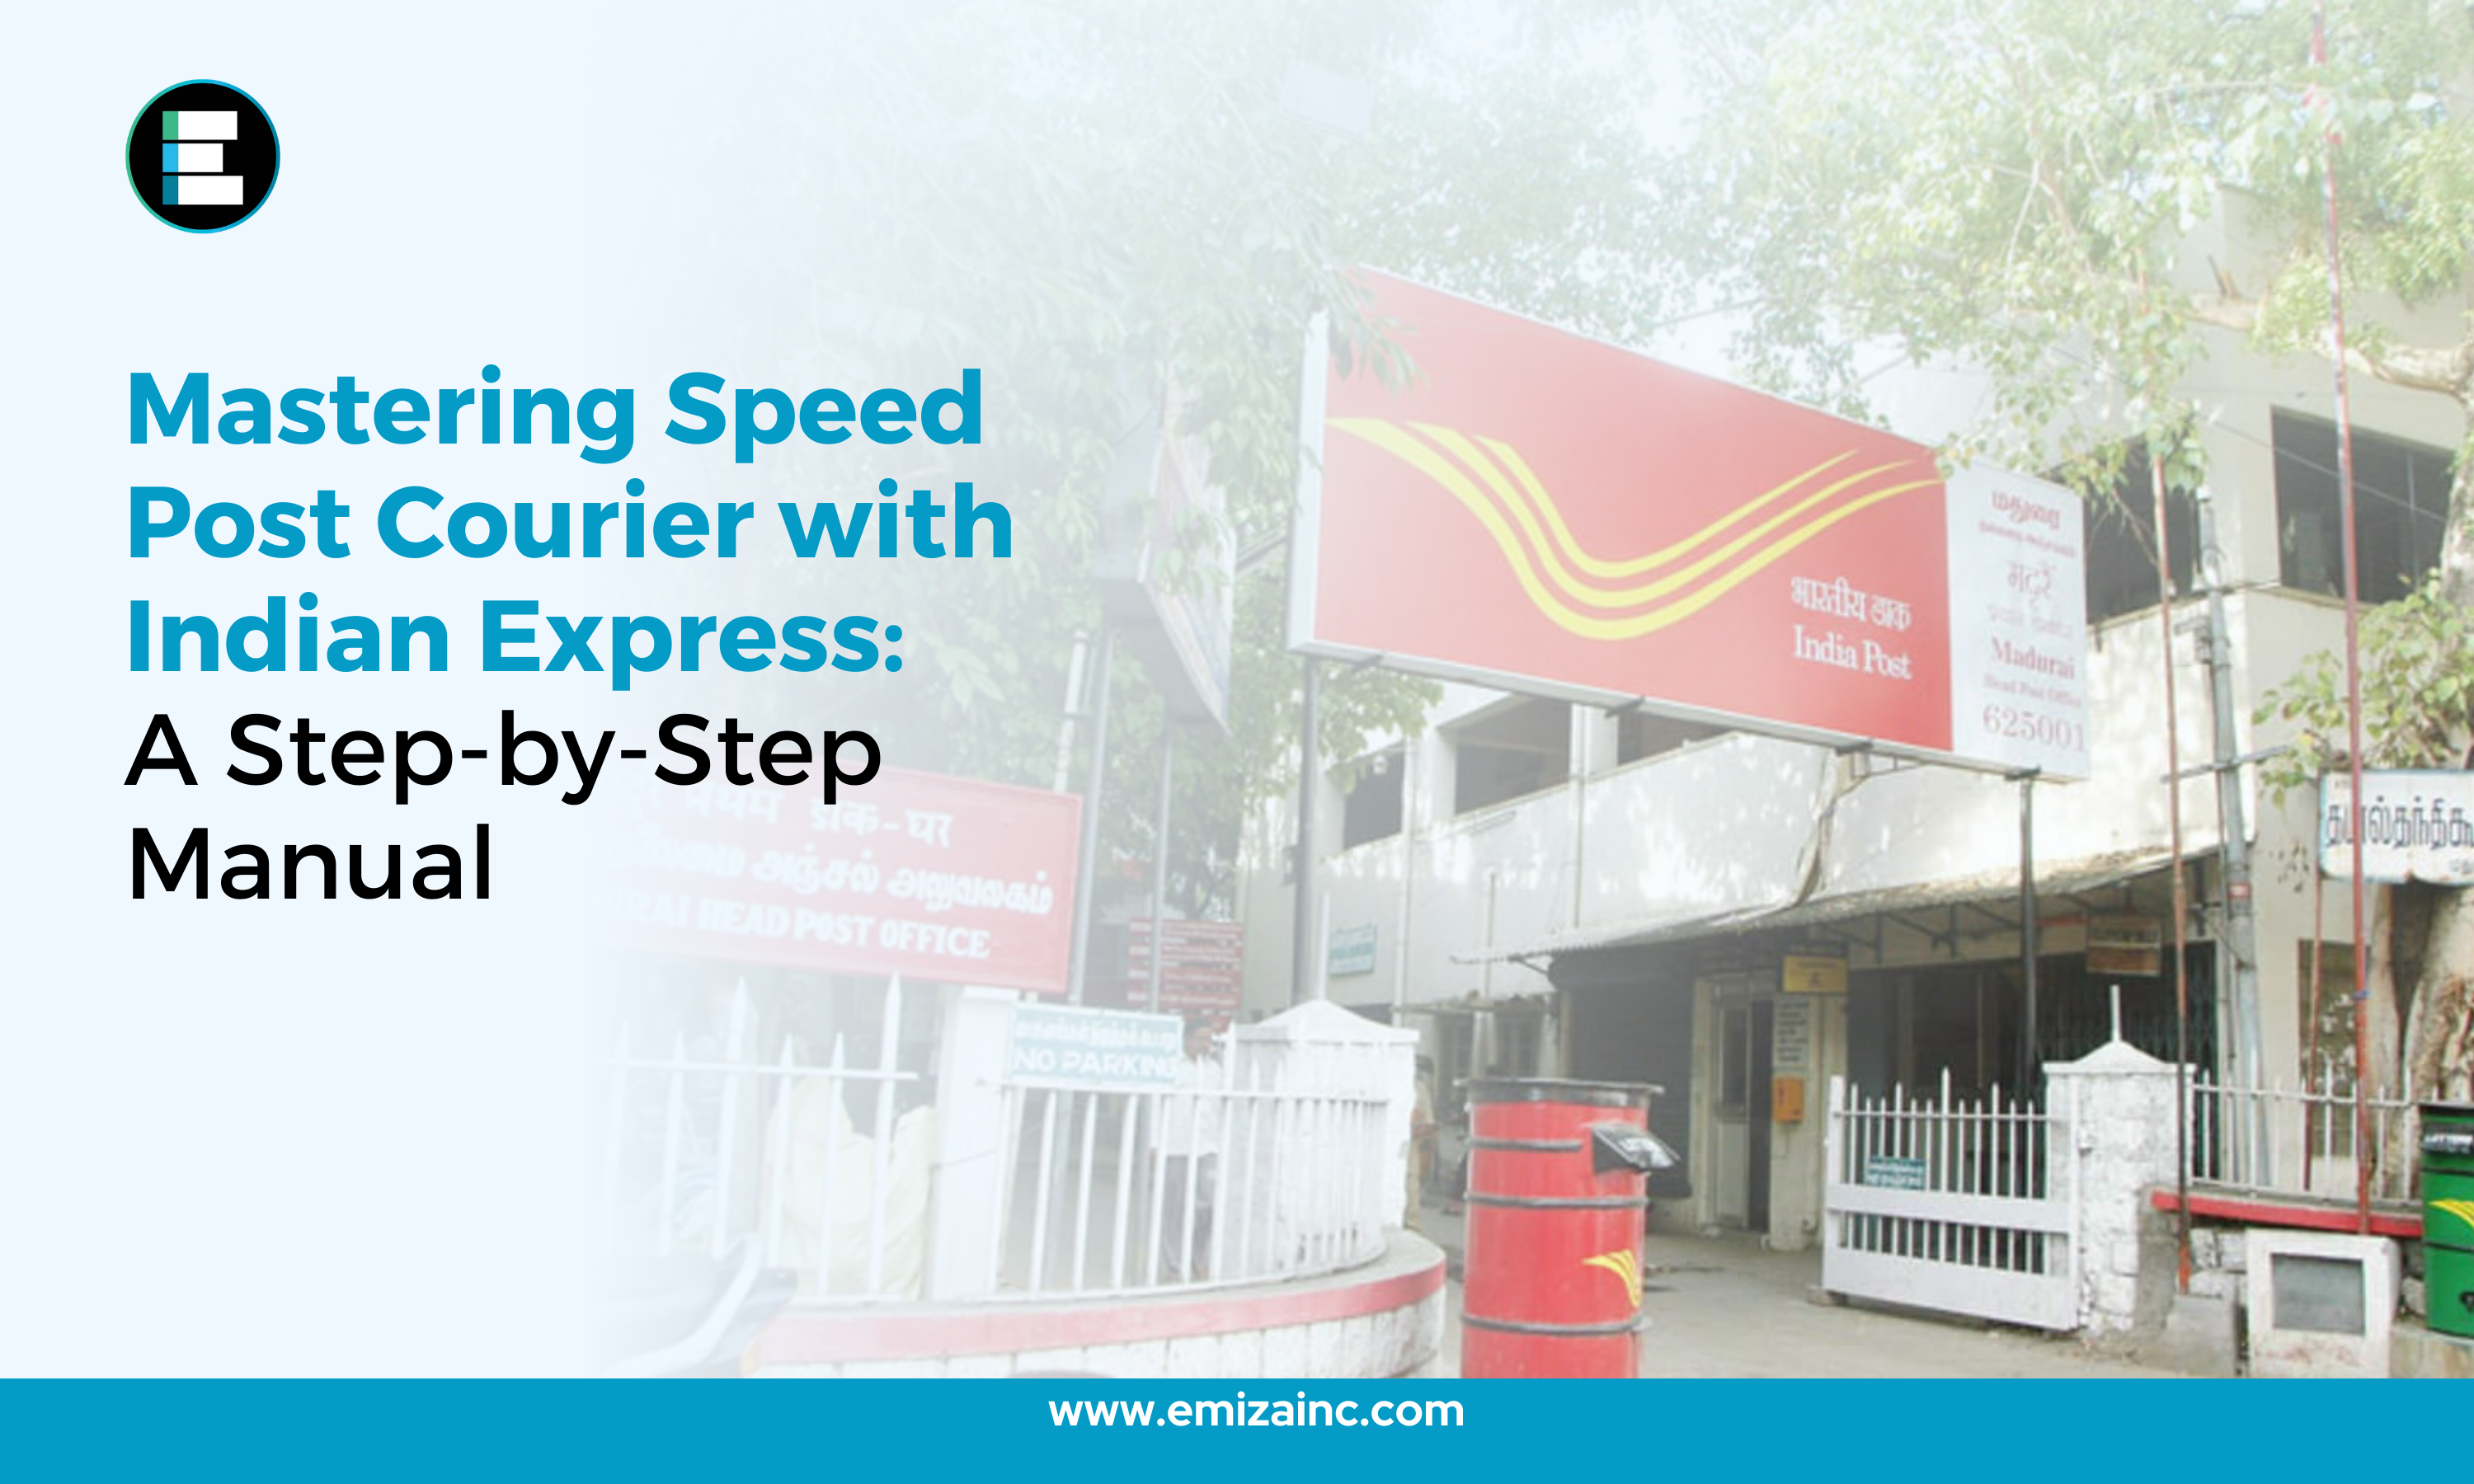 Mastering Speed Post Courier with Indian Express: A Step-by-Step Manual